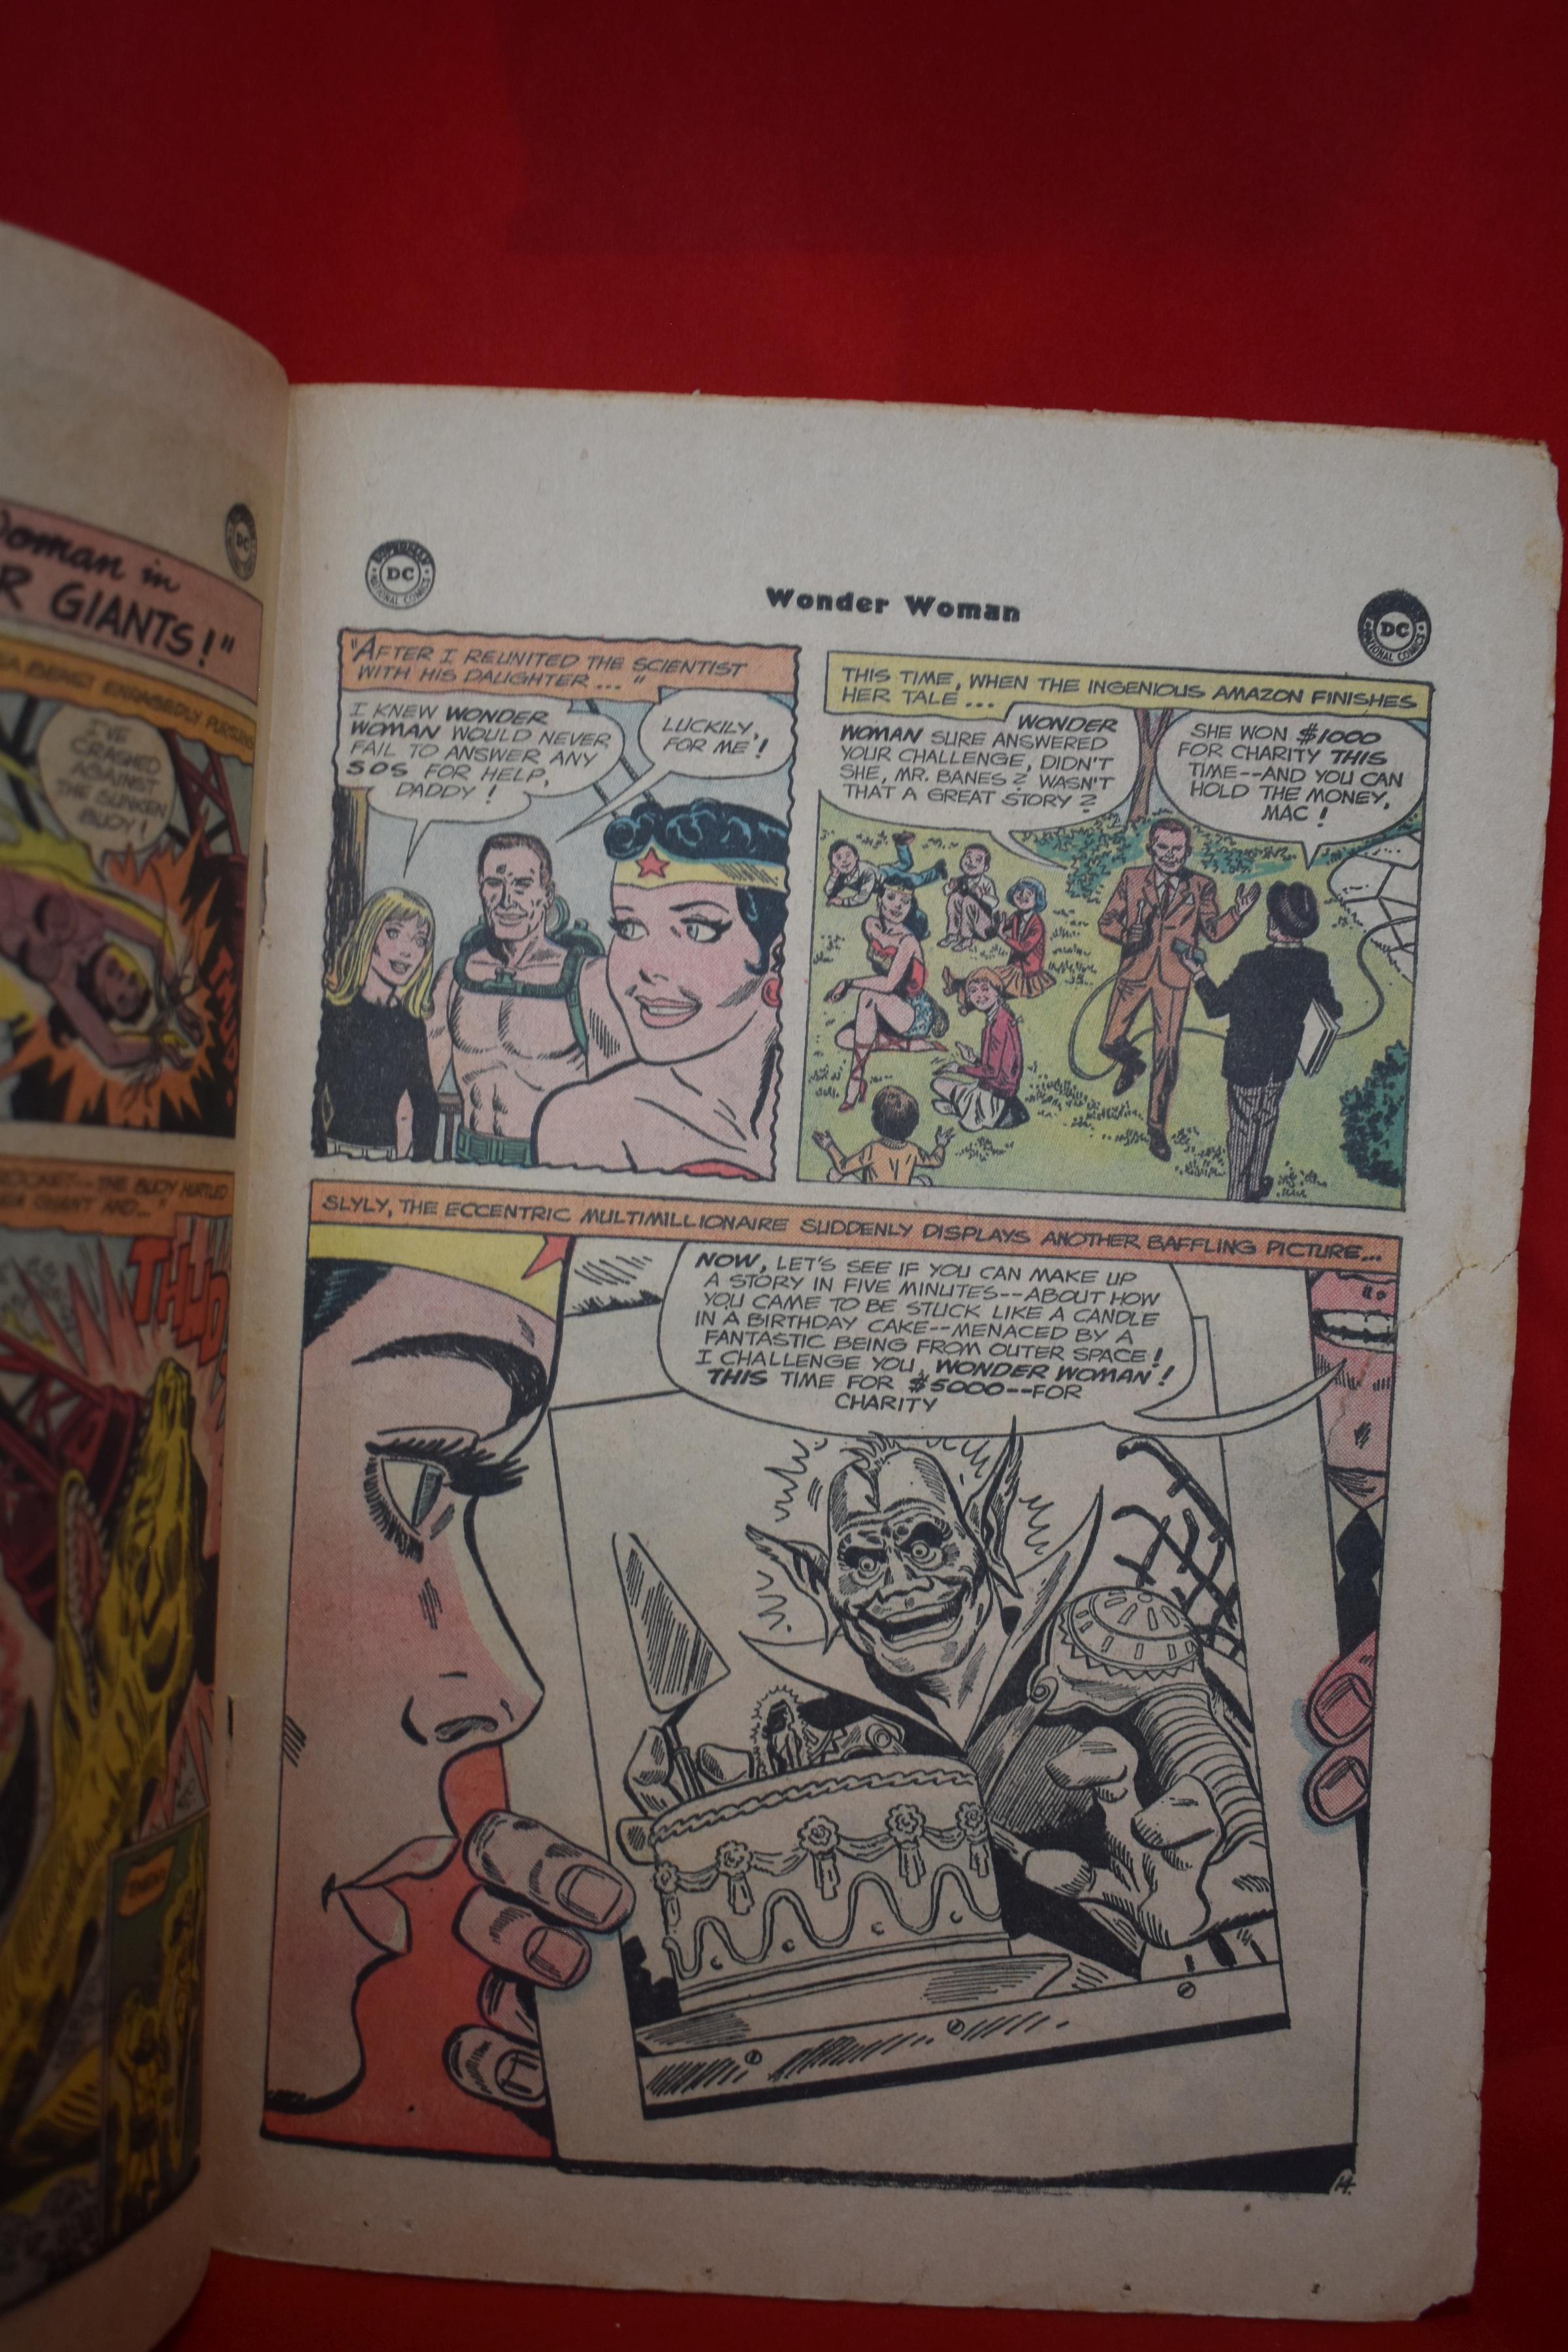 WONDER WOMAN #146 | WAR OF THE UNDERWATER GIANTS - 1964 | *CENTERFOLD DETACHED - TAPE - SEE PICS*